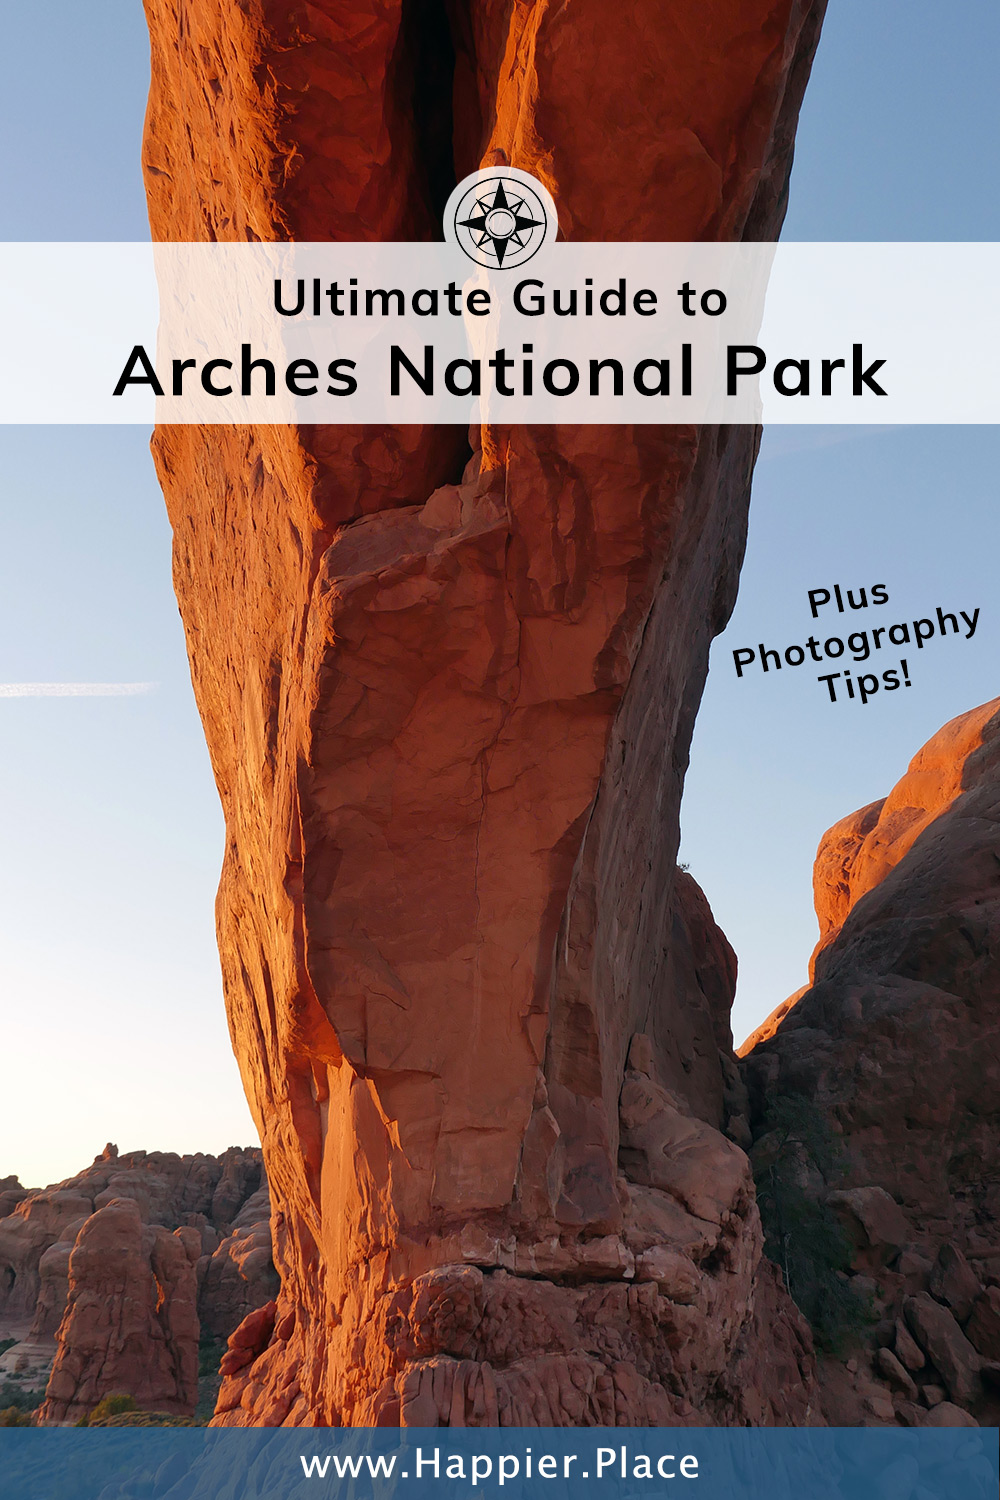 Ultimate Guide to Arches National Park (Utah) - Includes Photography Tips!